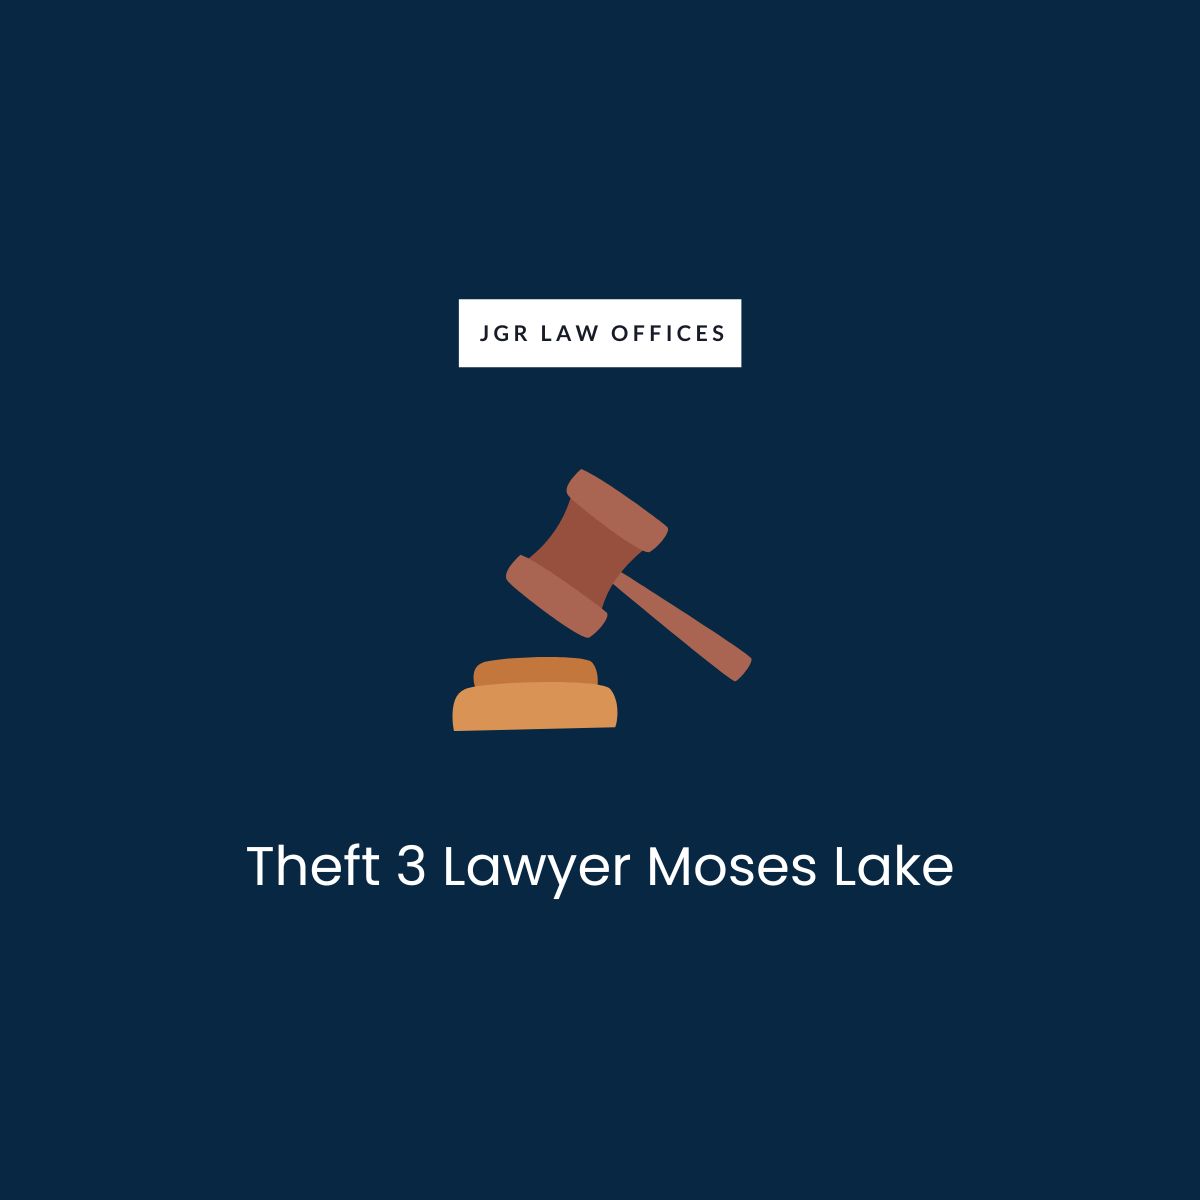 Theft 3 Attorney Moses Lake